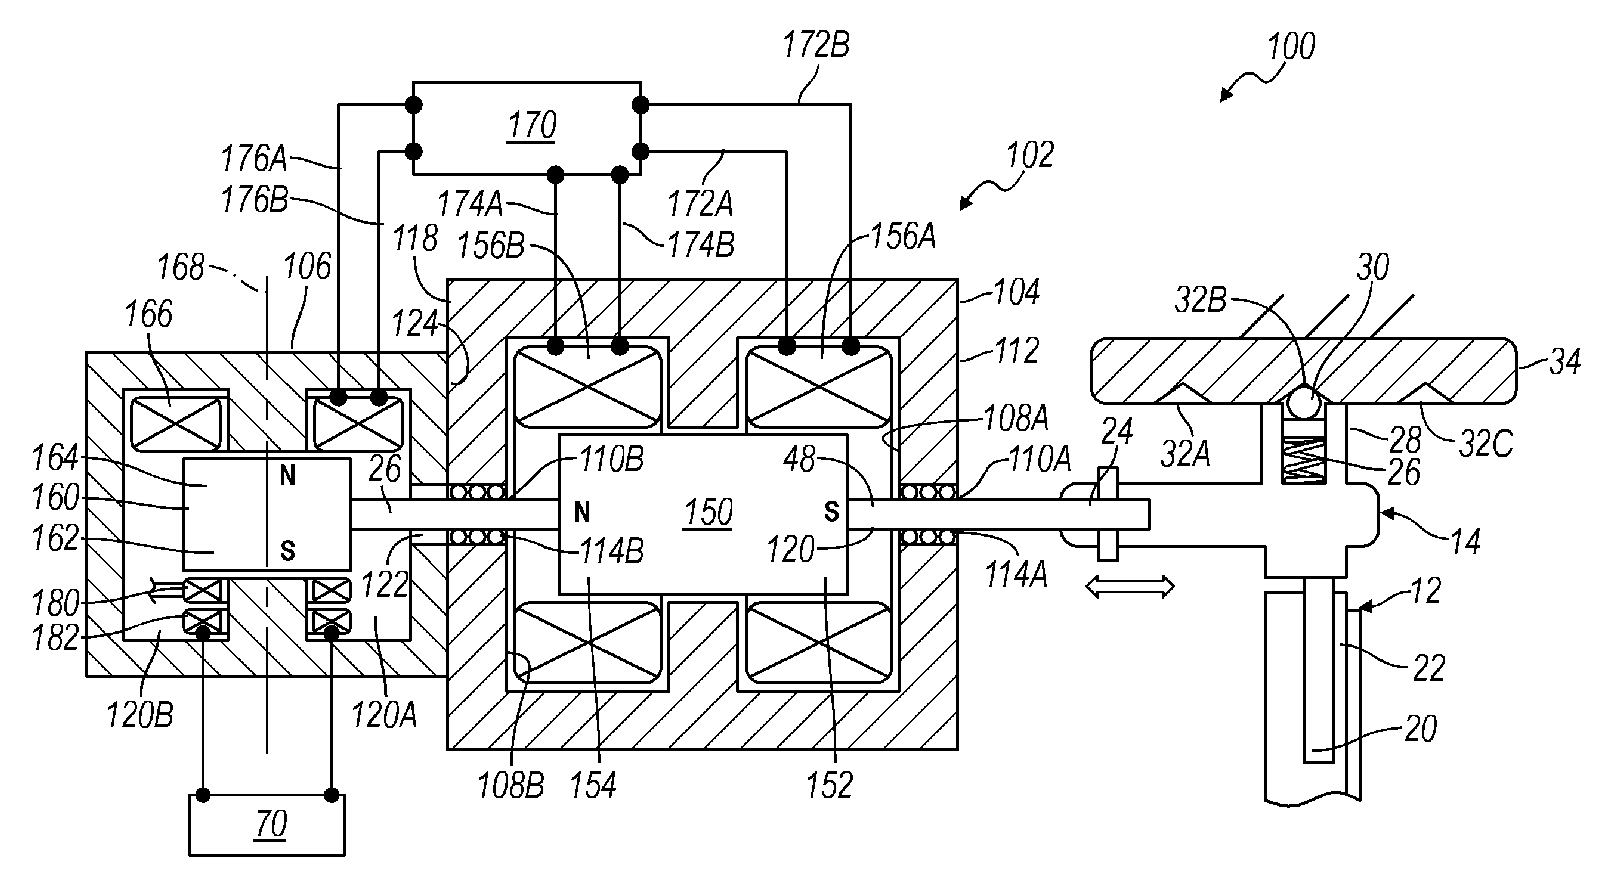 Electromagnetic synchronizer actuating system